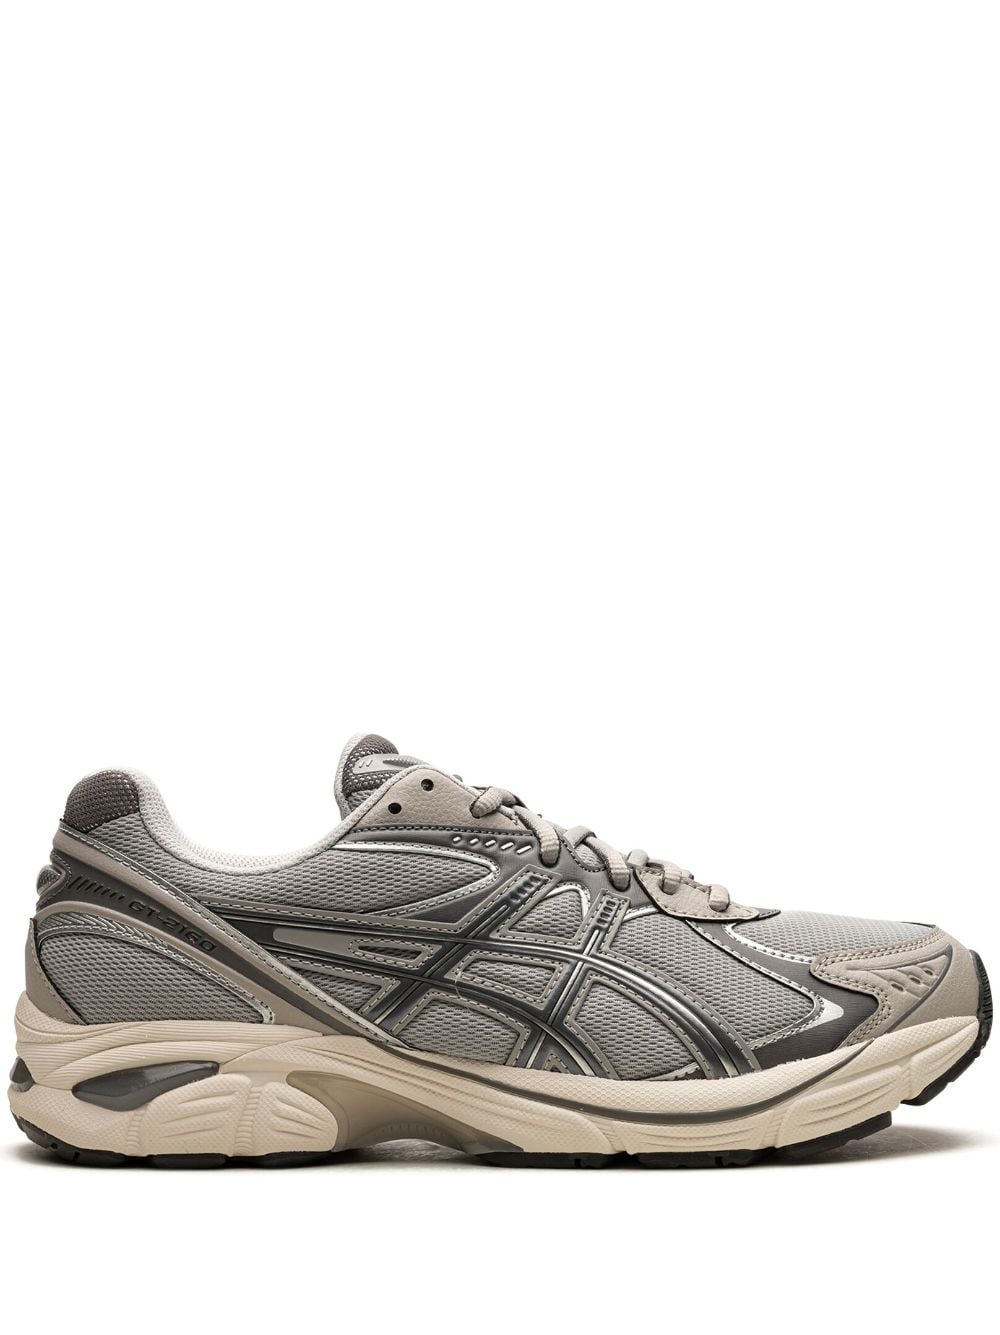 ASICS GT-2160 "Oyster Grey" sneakers von ASICS